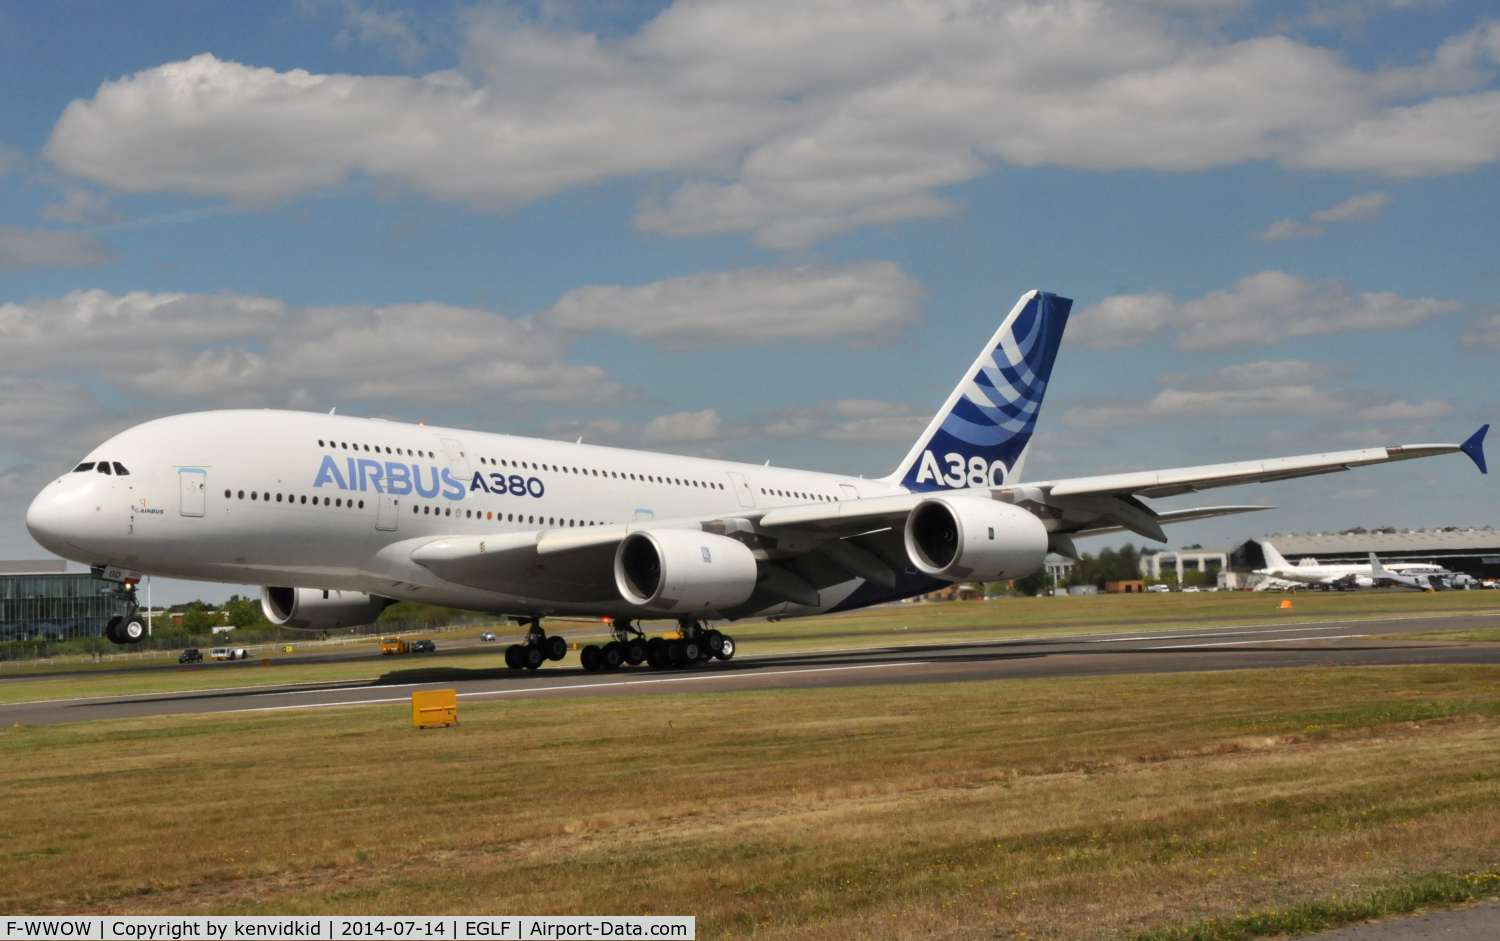 F-WWOW, 2005 Airbus A380-841 C/N 001, Landing after it's display.